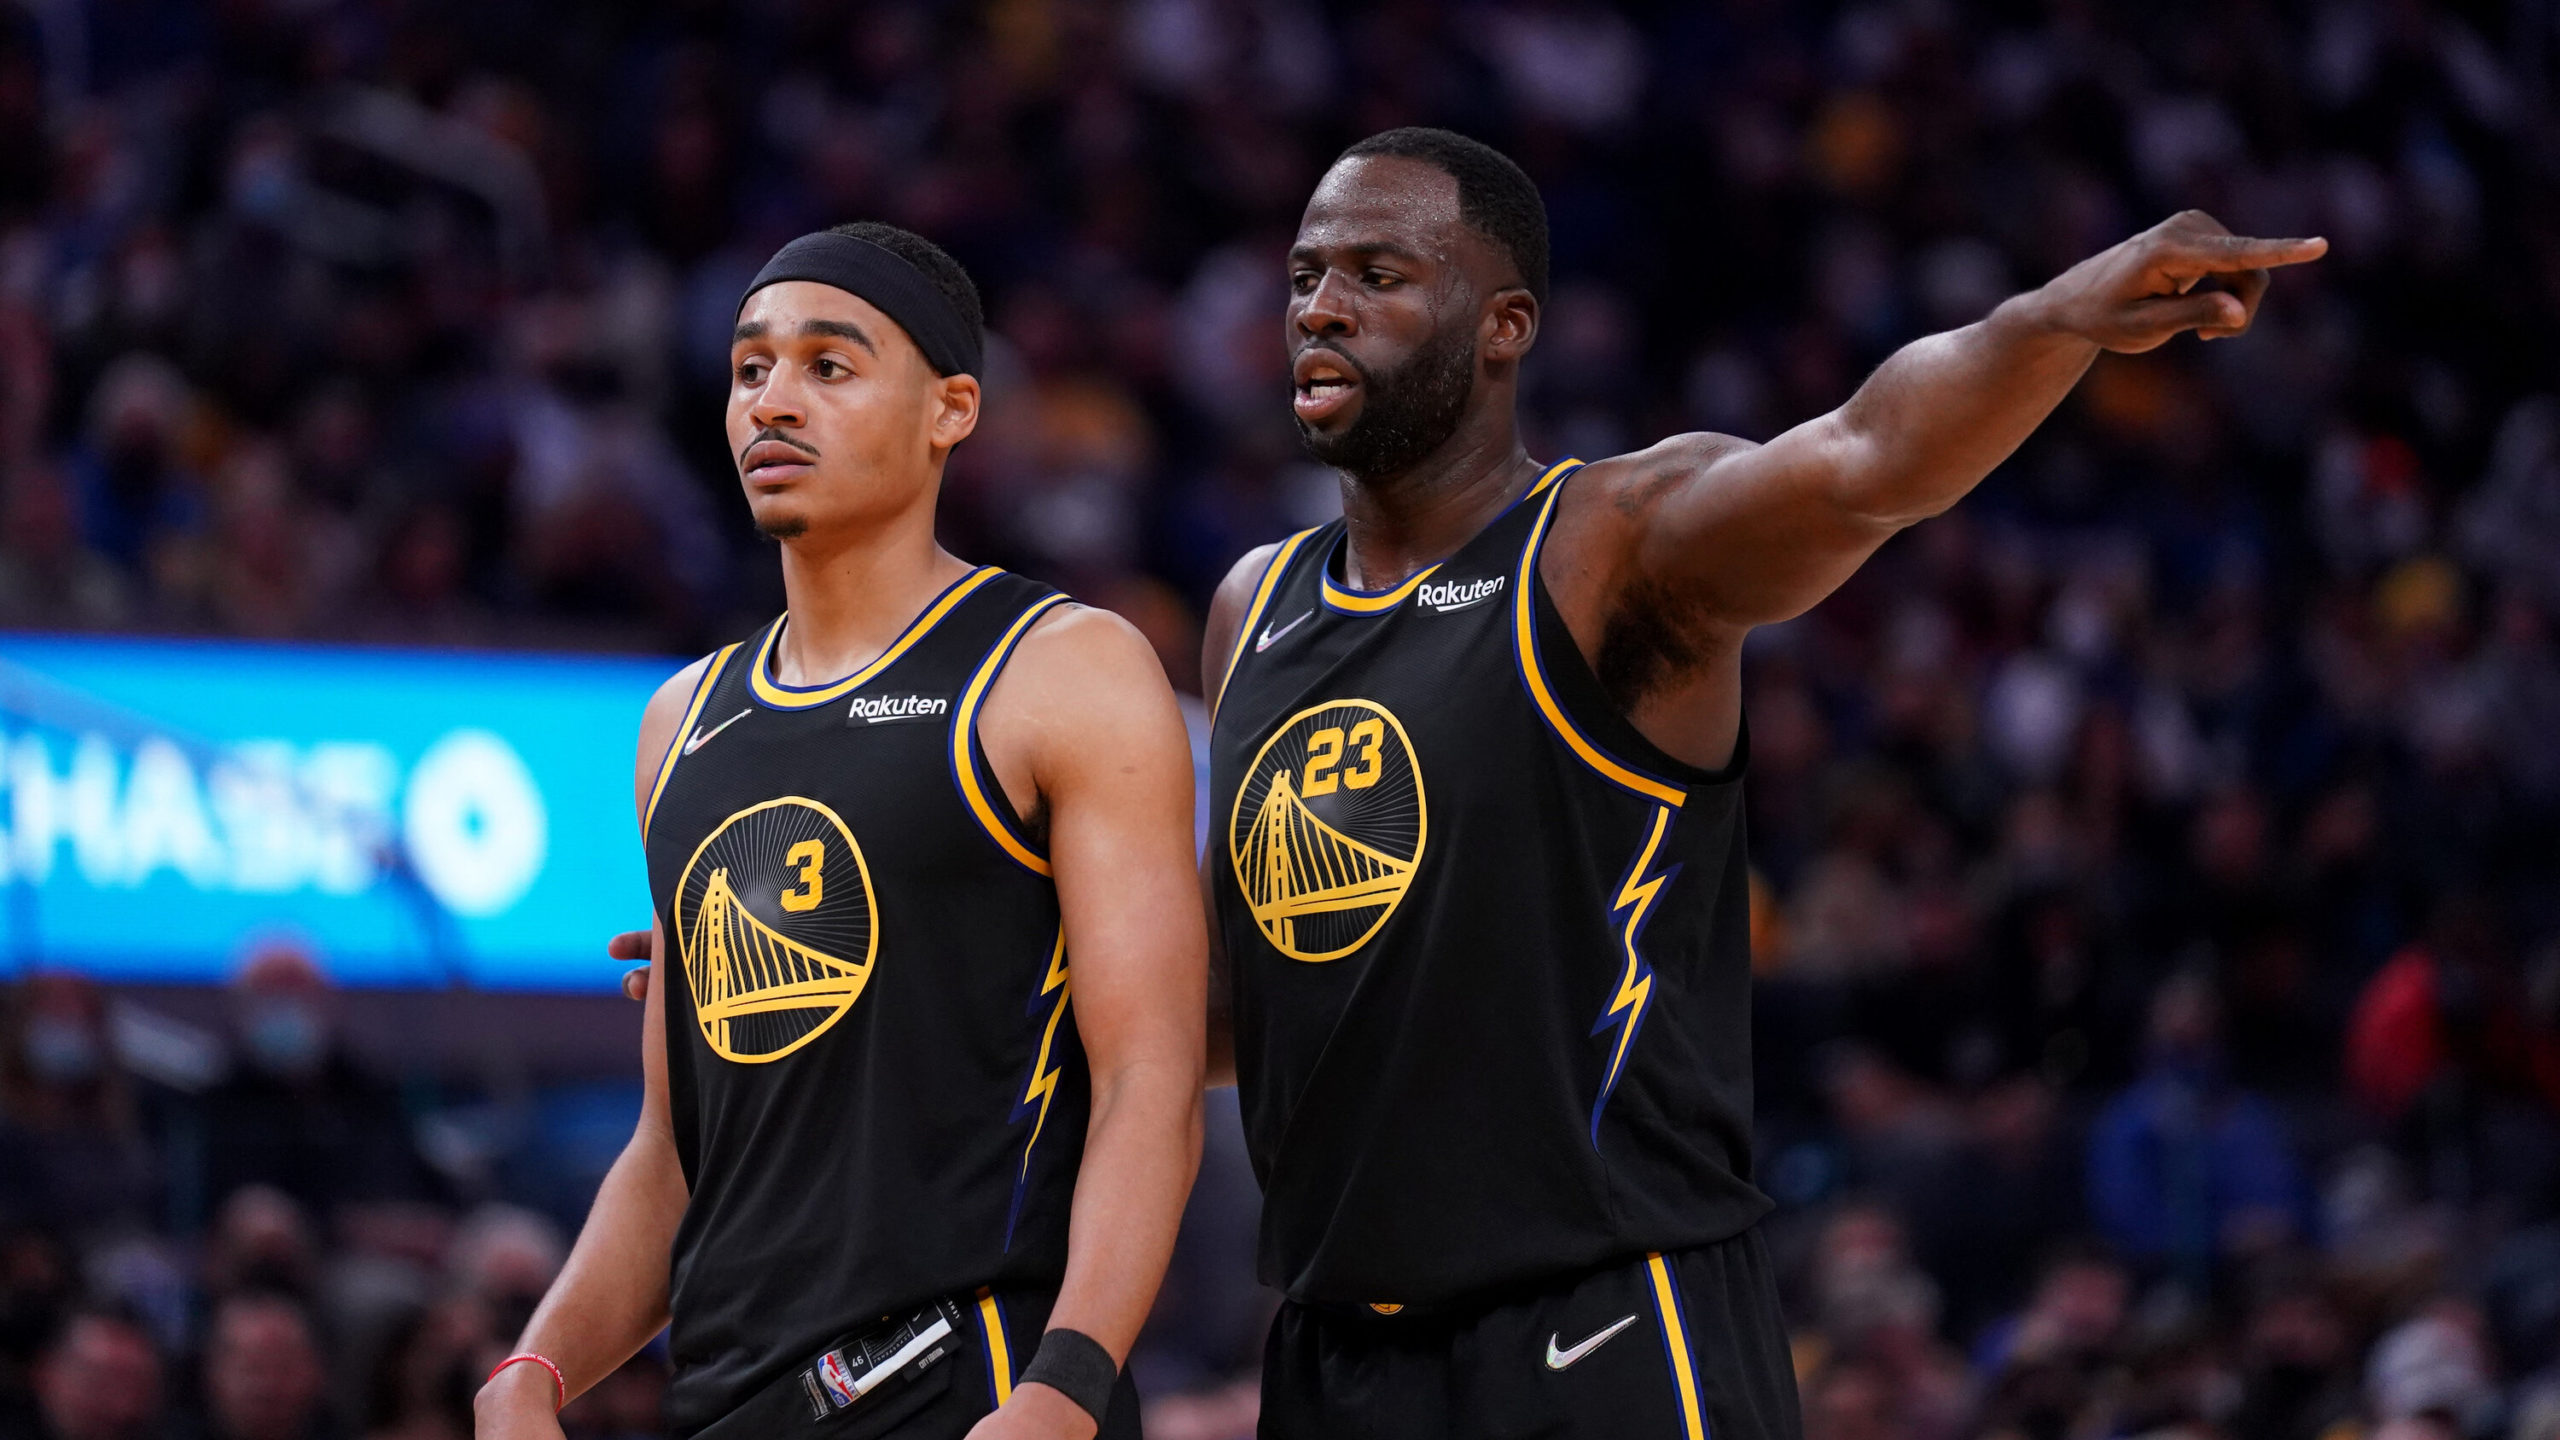 Jordan Poole Cuts Off Draymond Green By Unfollowing Him On Instagram After Being Traded By The Warriors